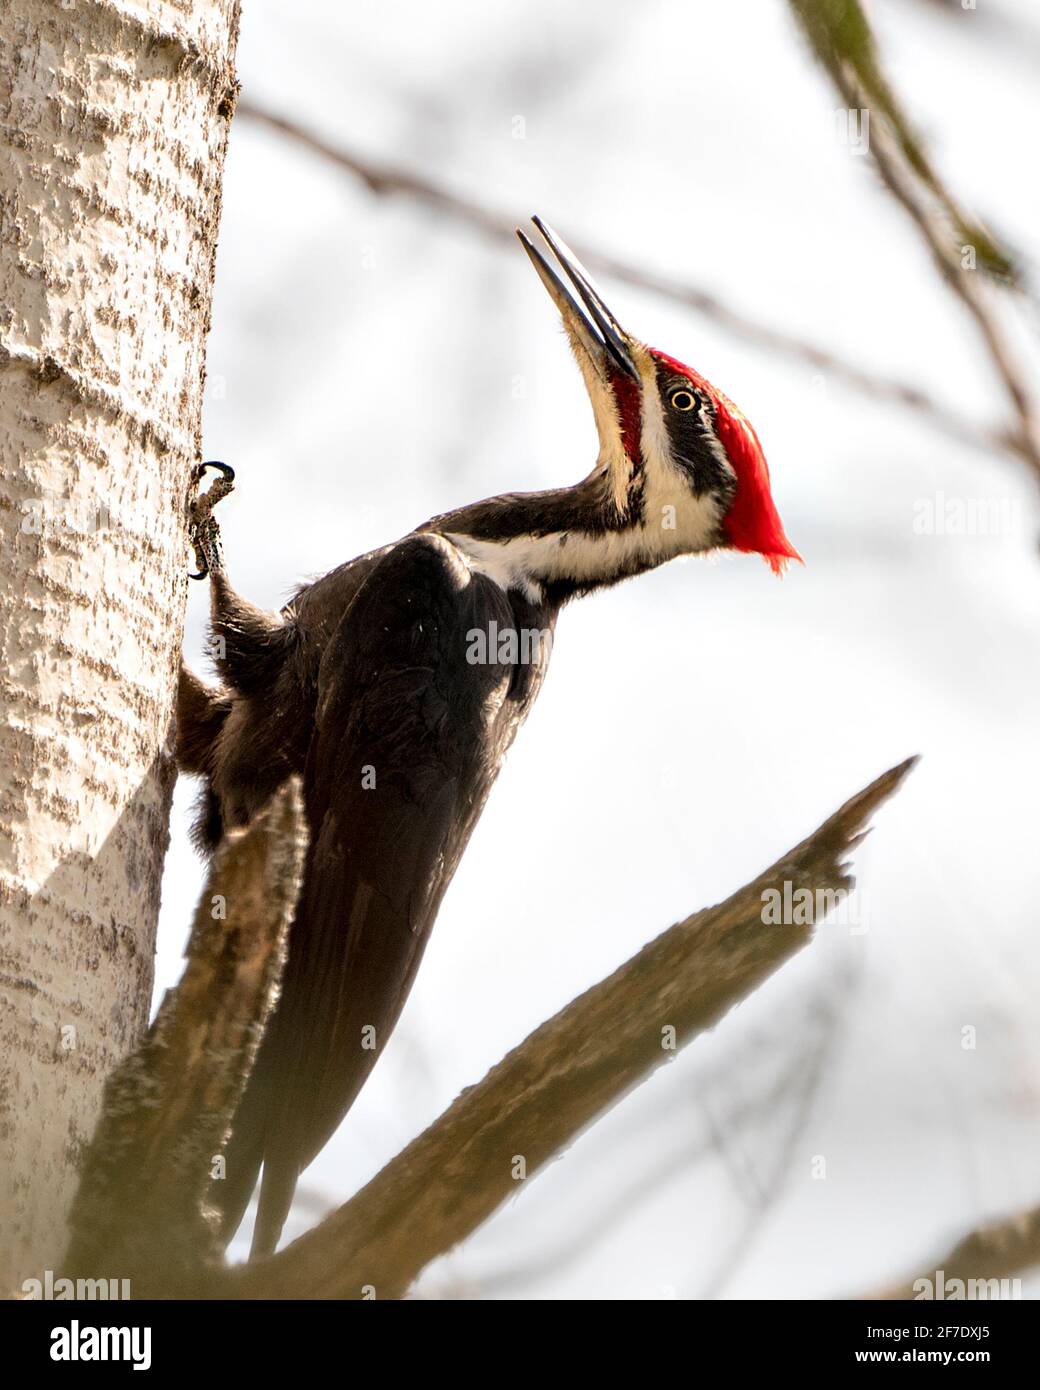 Woodpecker bird close-up profile view perched on a tree trunk with blur background in its environment and habitat. Pileated Woodpecker Image. Picture. Stock Photo